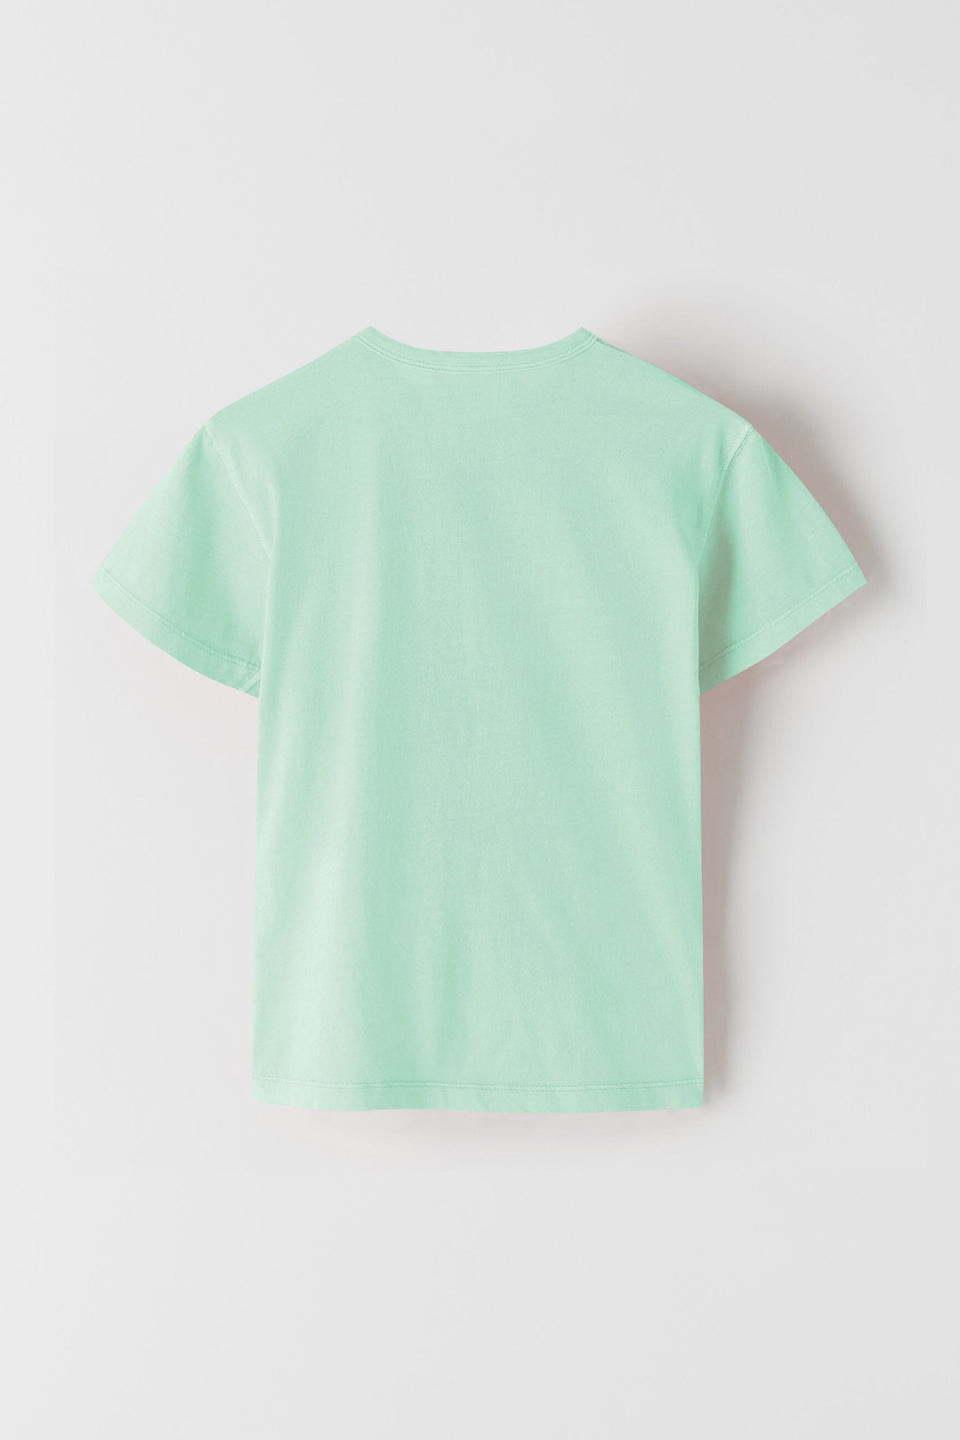 Kids Boys & Girls Lite Green Solid Pure Cotton Casual T-Shirt